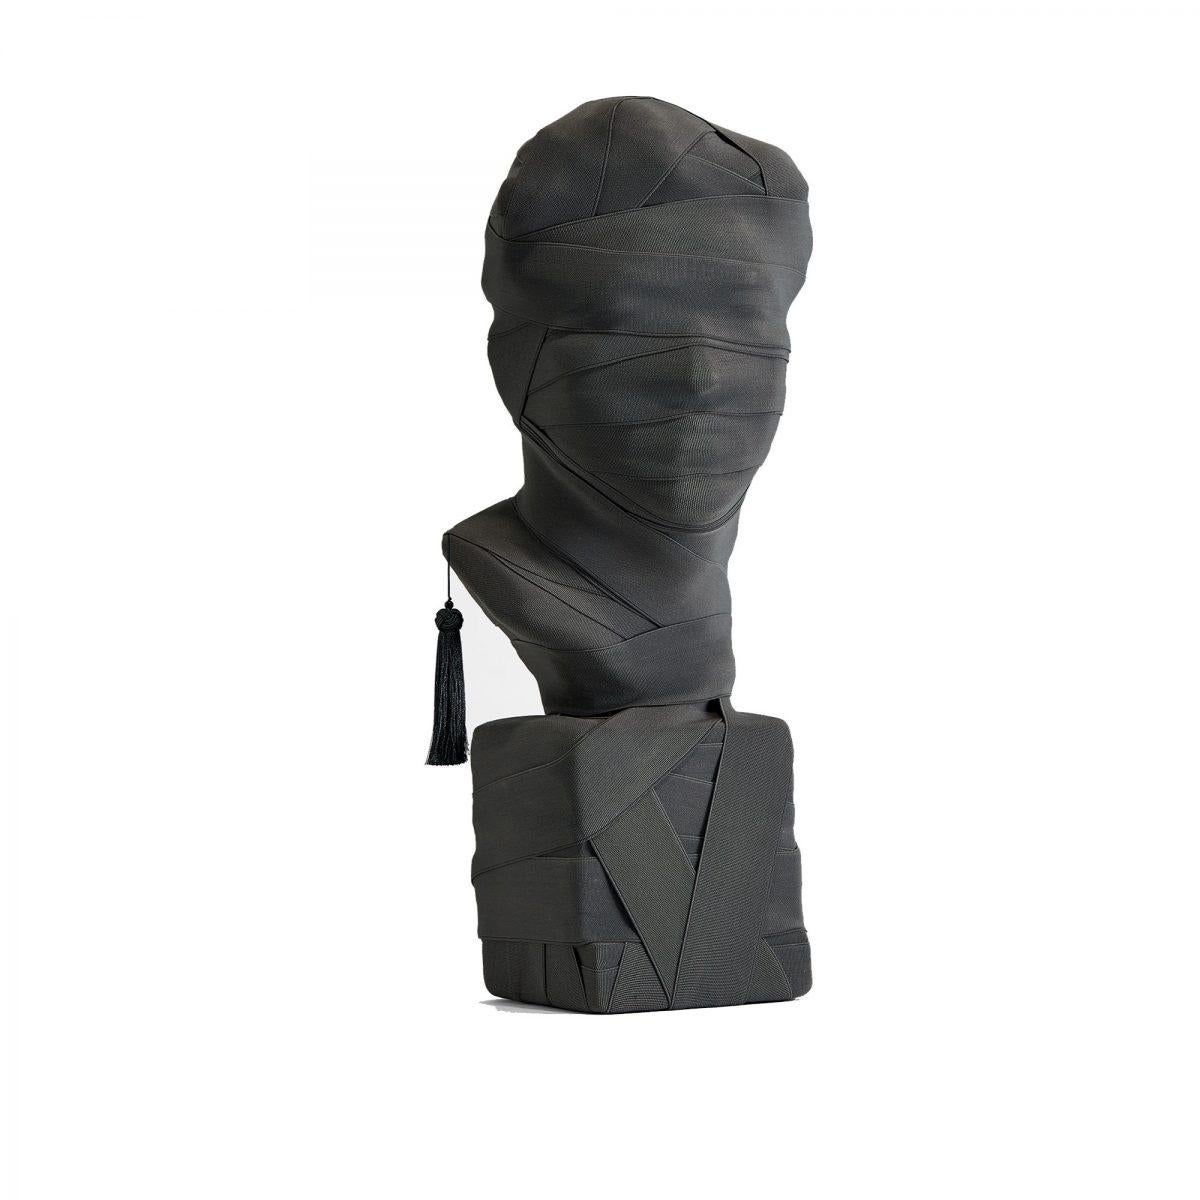 Contemporary This is Not a Self Portrait Sculpture by Thomas Dariel